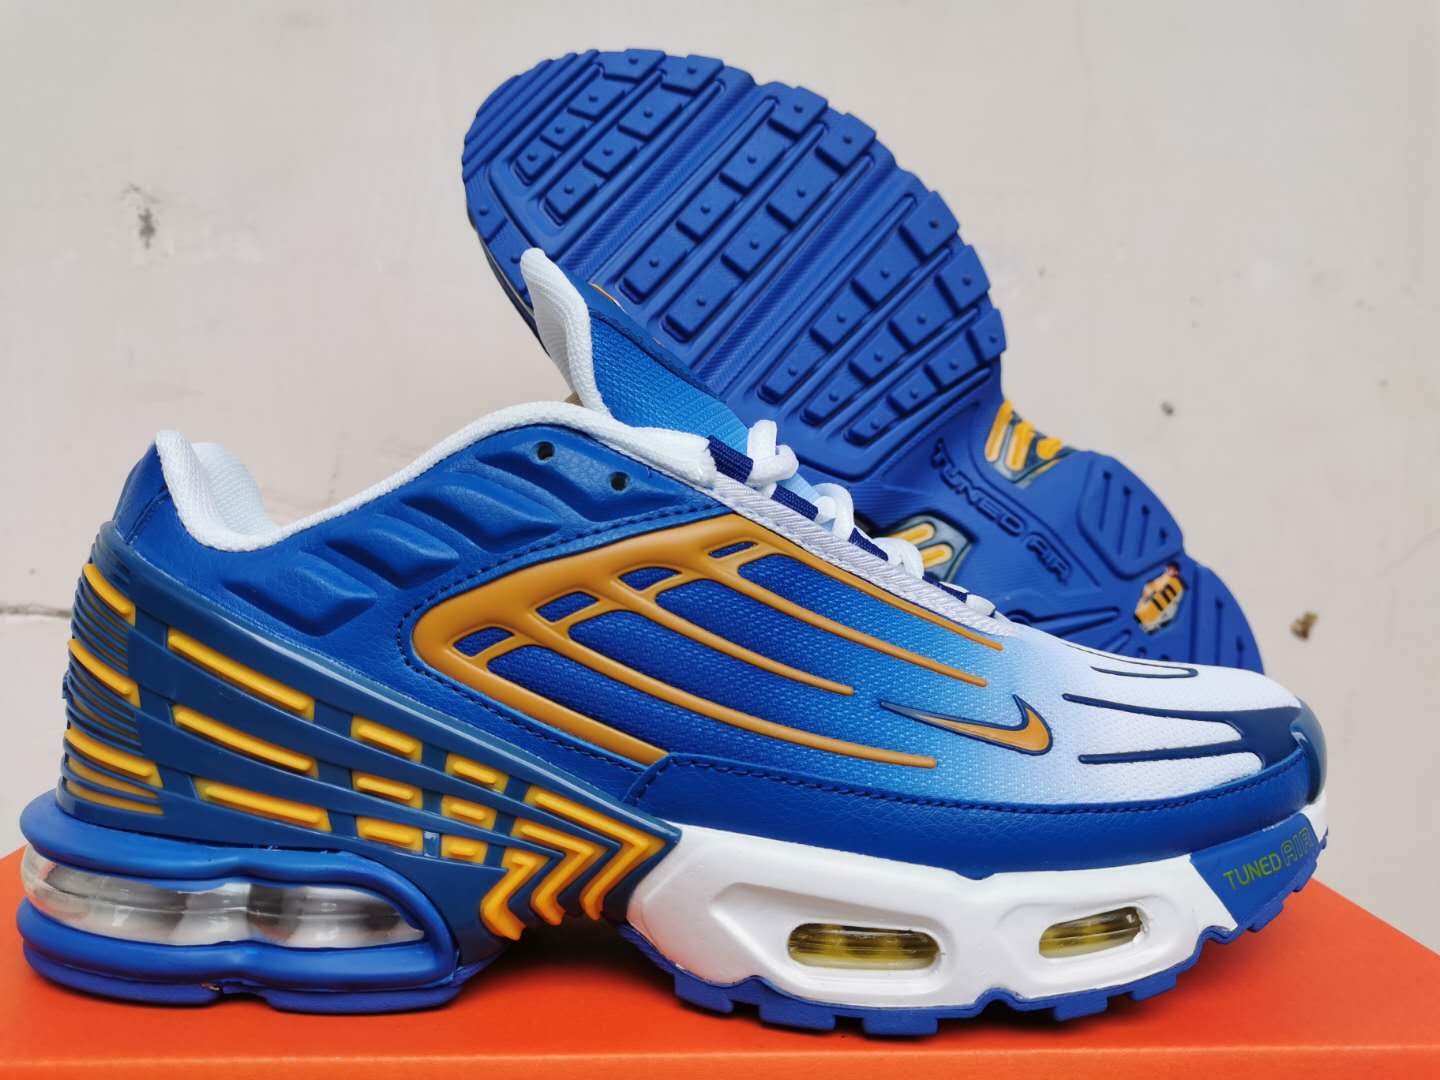 Women's Hot sale Running weapon Air Max TN Shoes 019